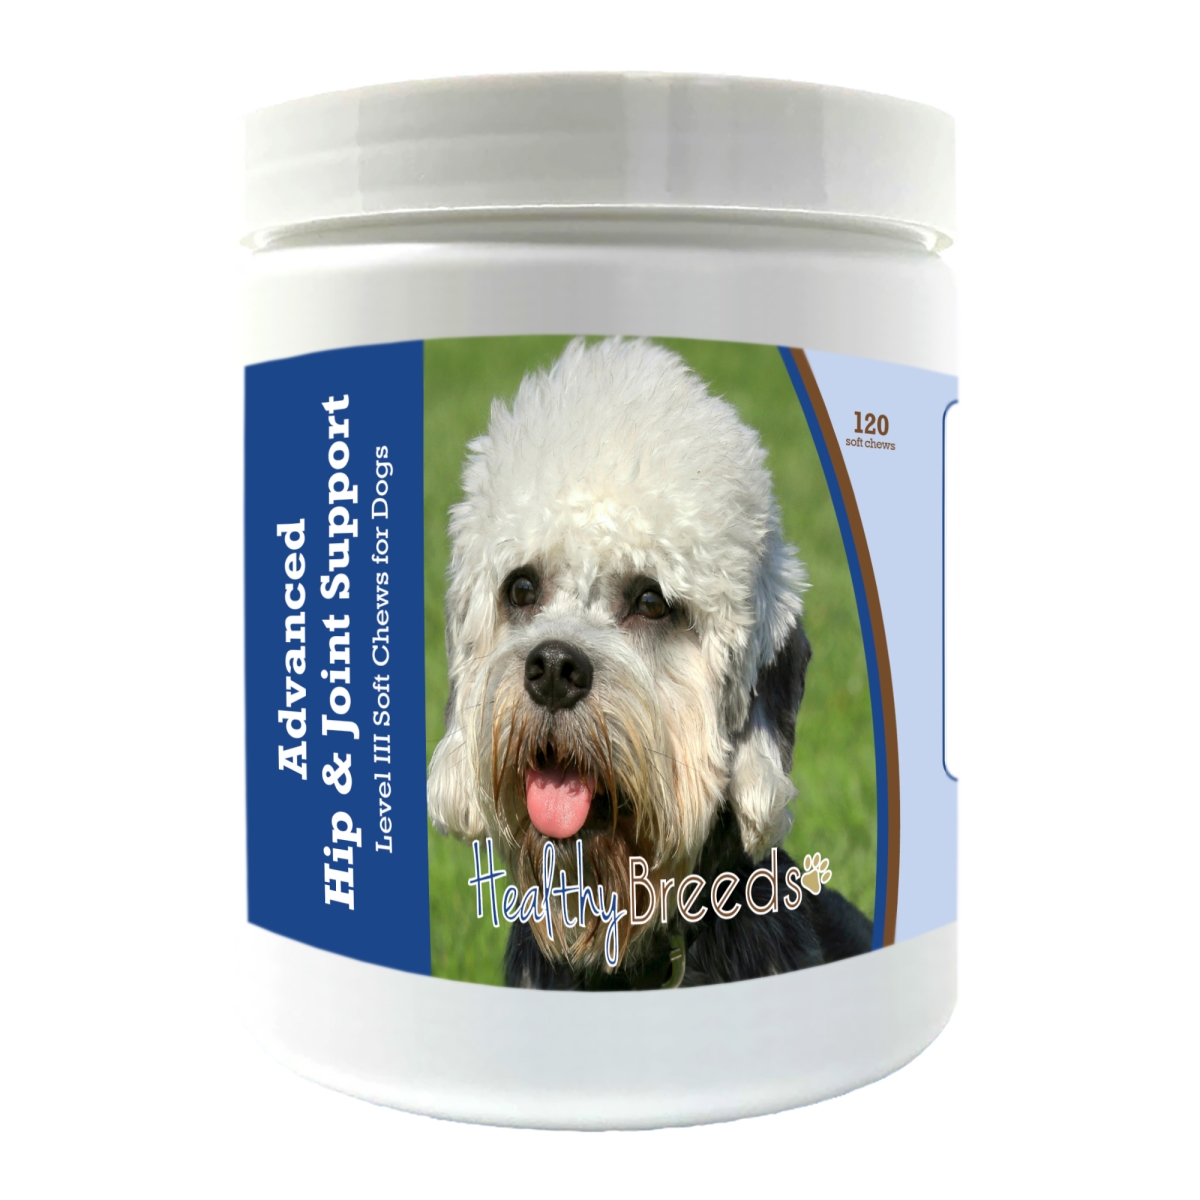 Picture of Healthy Breeds 192959898088 Dandie Dinmont Terrier Advanced Hip & Joint Support Level III Soft Chews for Dogs